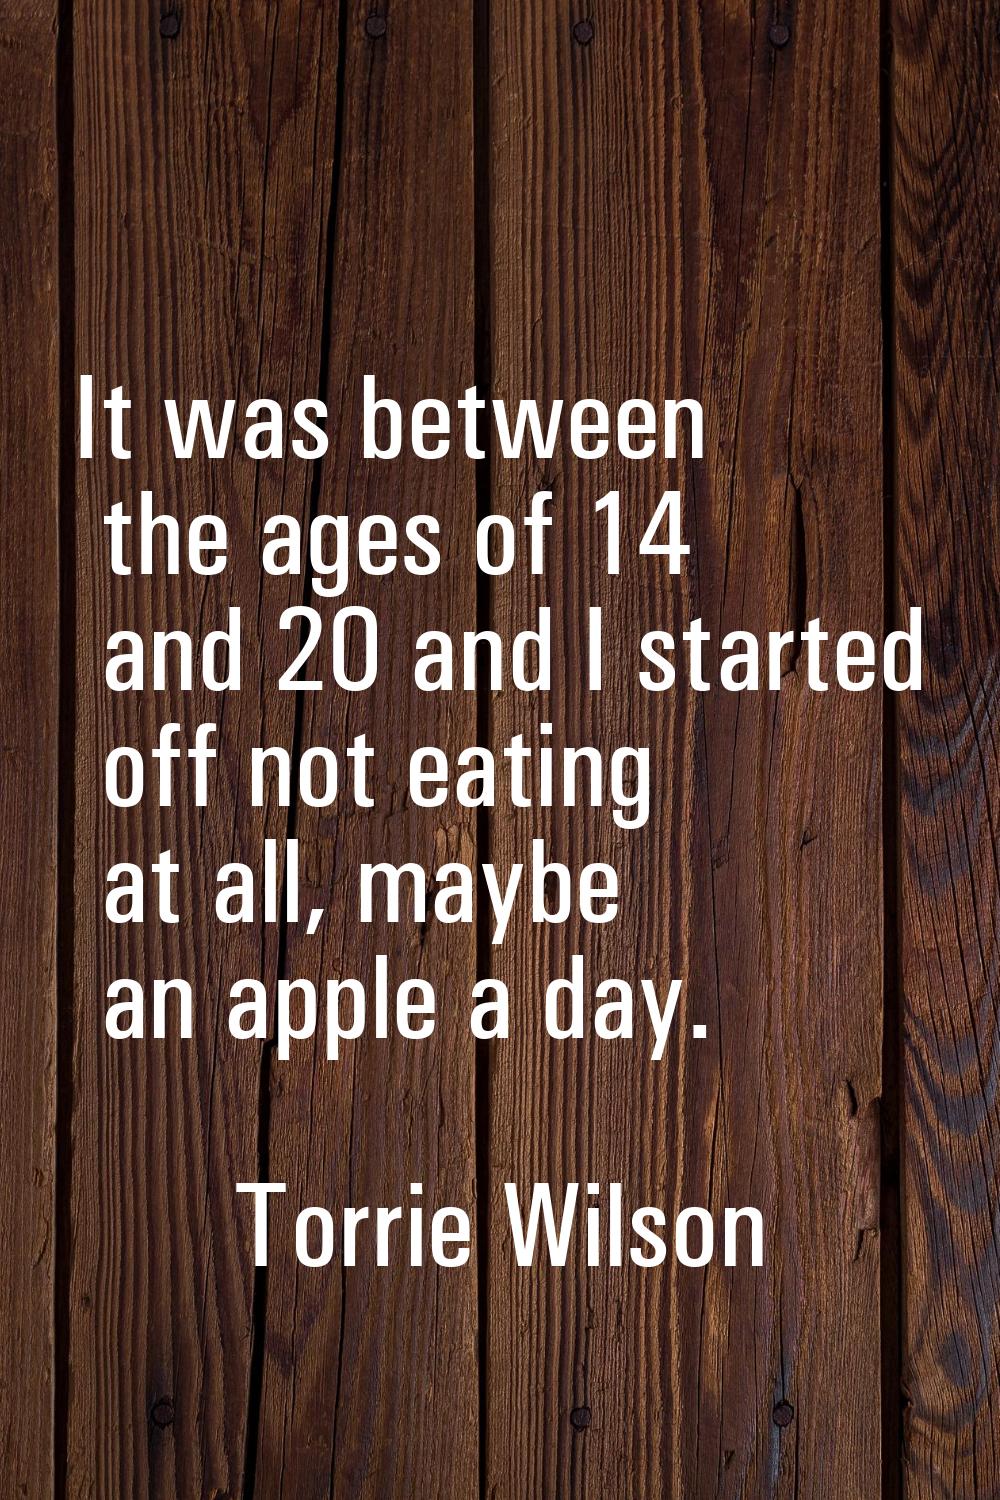 It was between the ages of 14 and 20 and I started off not eating at all, maybe an apple a day.